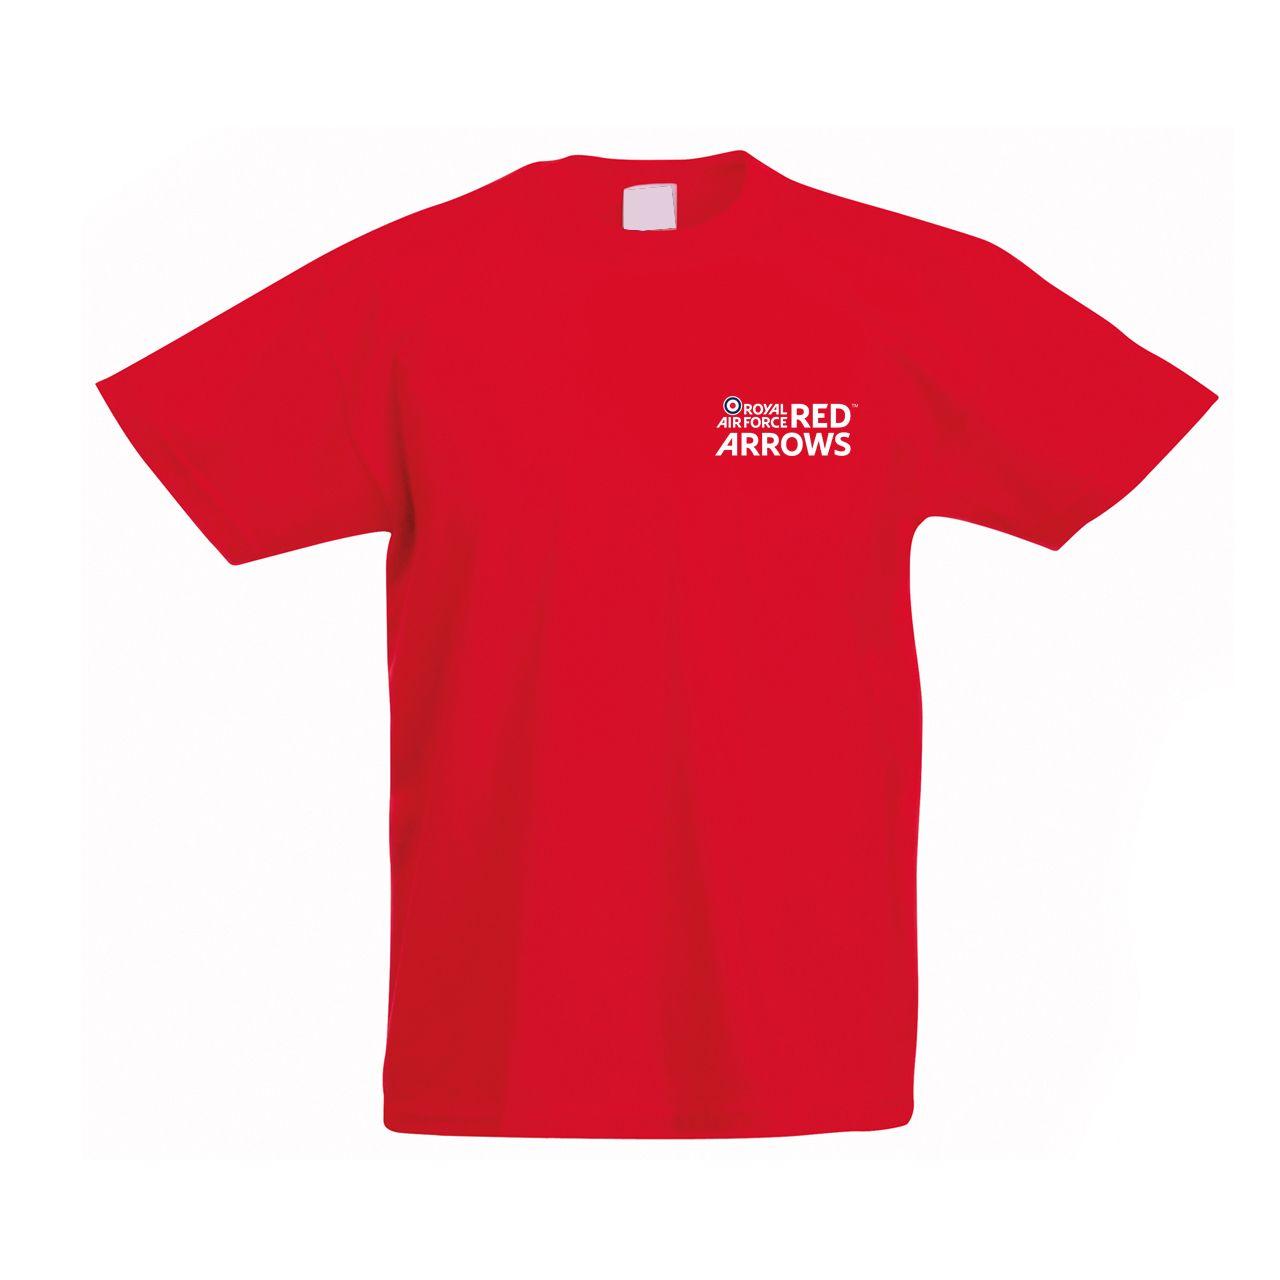 Red Arrow Looking Logo - Official RAF Red Arrows Logo Kids T Shirt